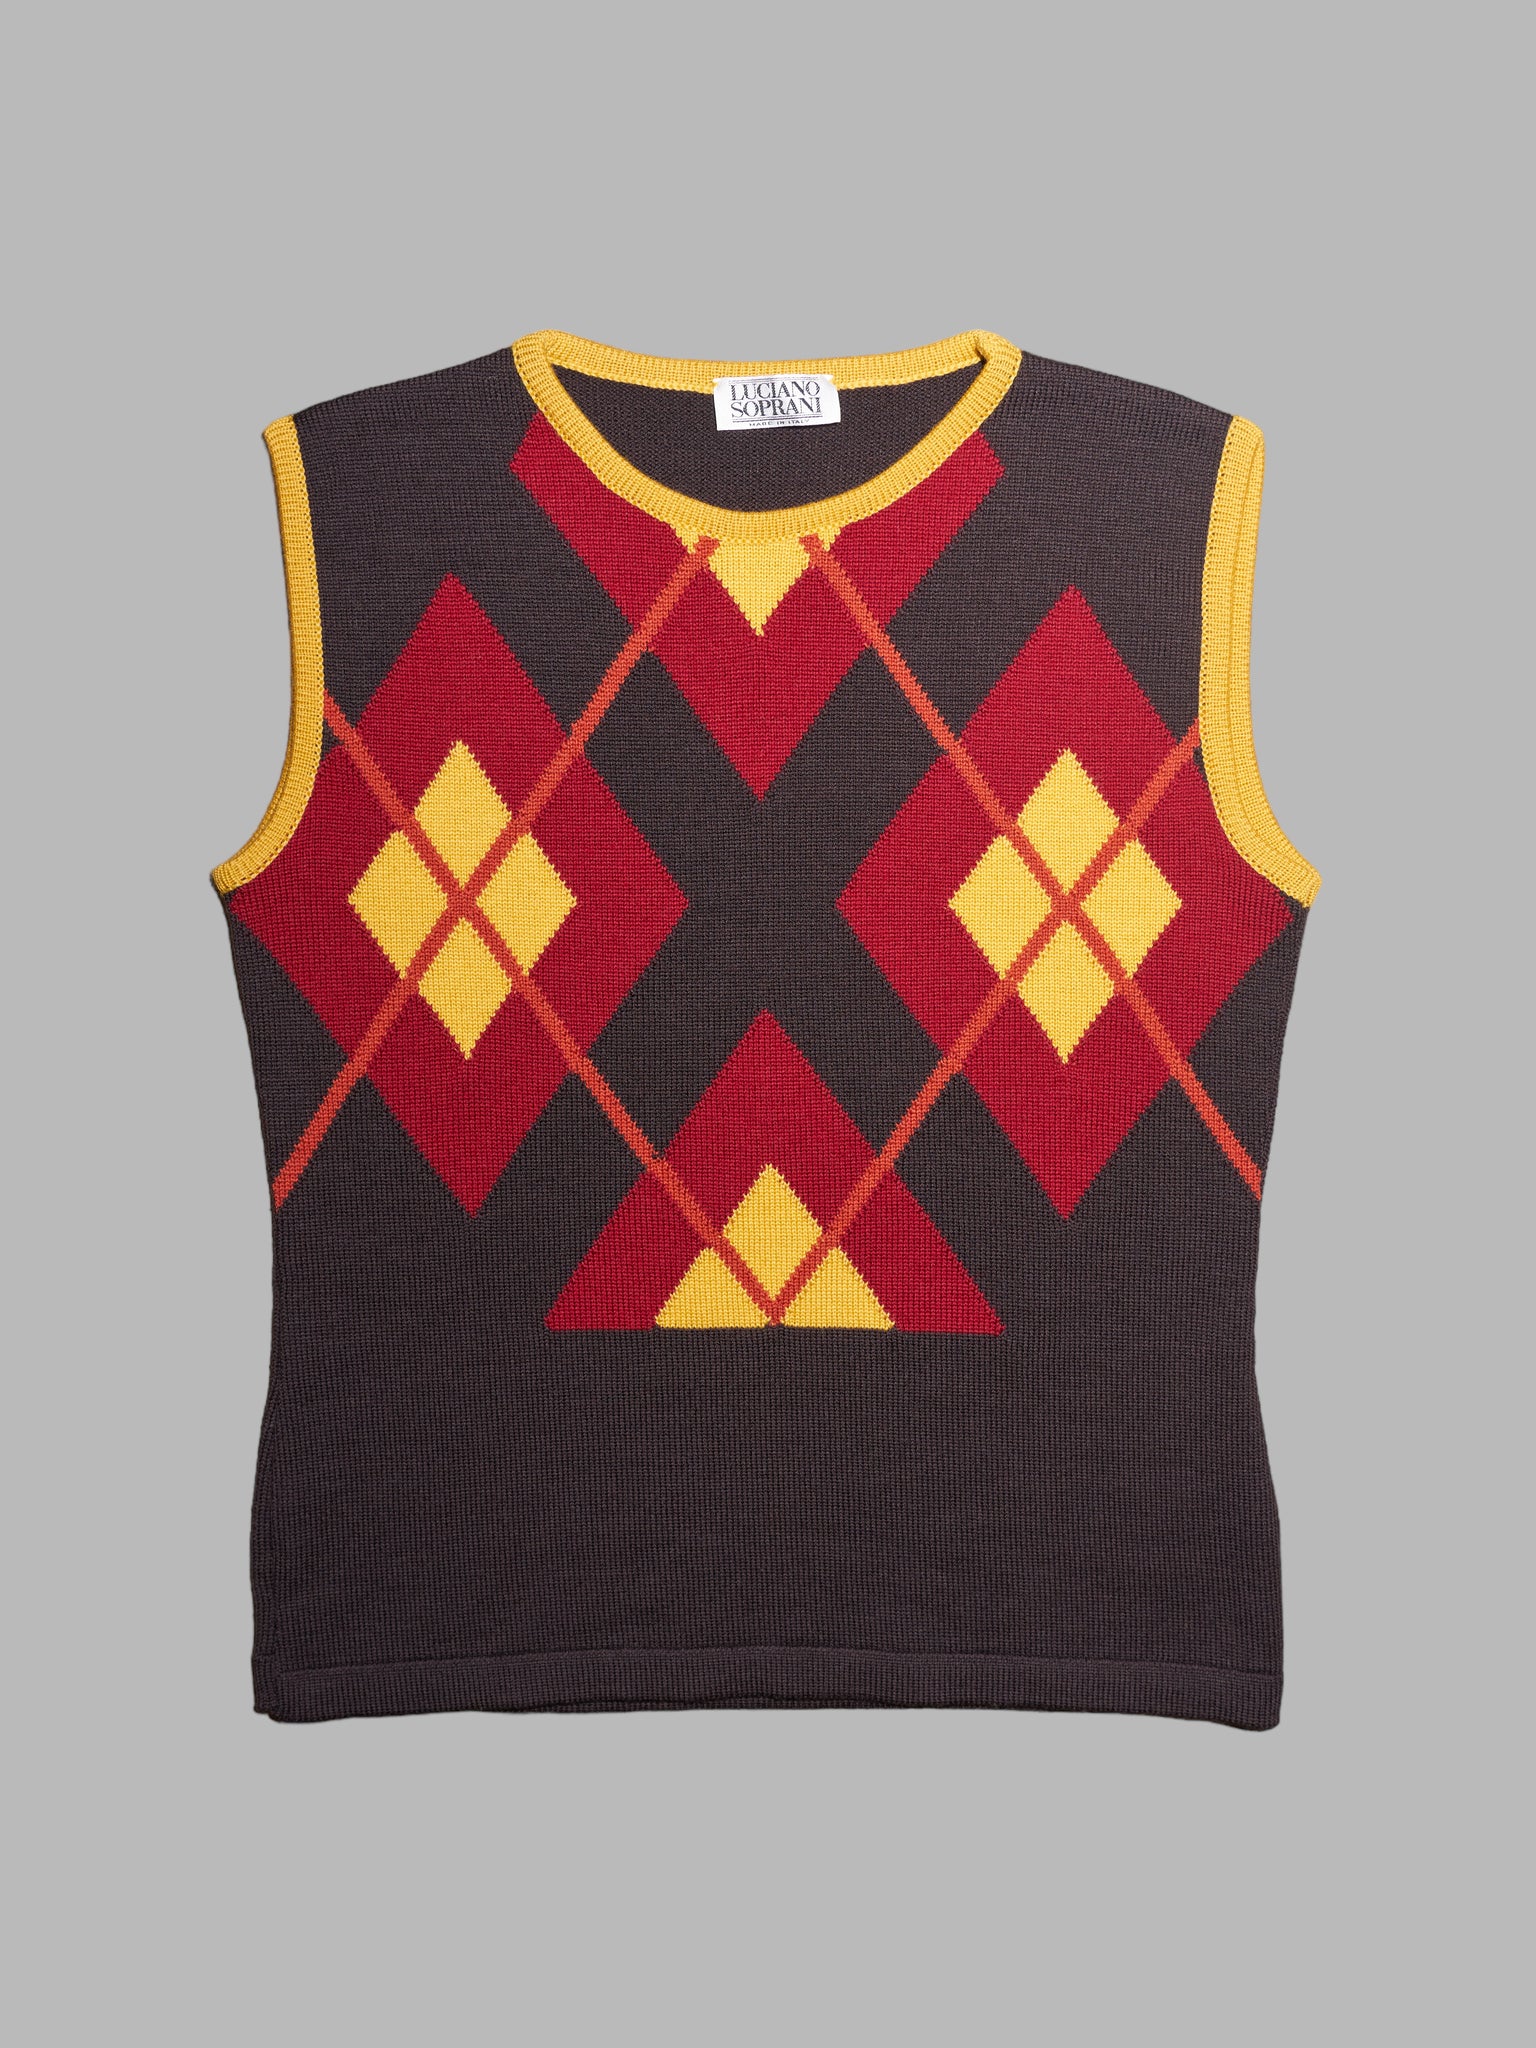 Luciano Soprani brown red yellow argyle knitted wool sweater vest - sz 42 IT